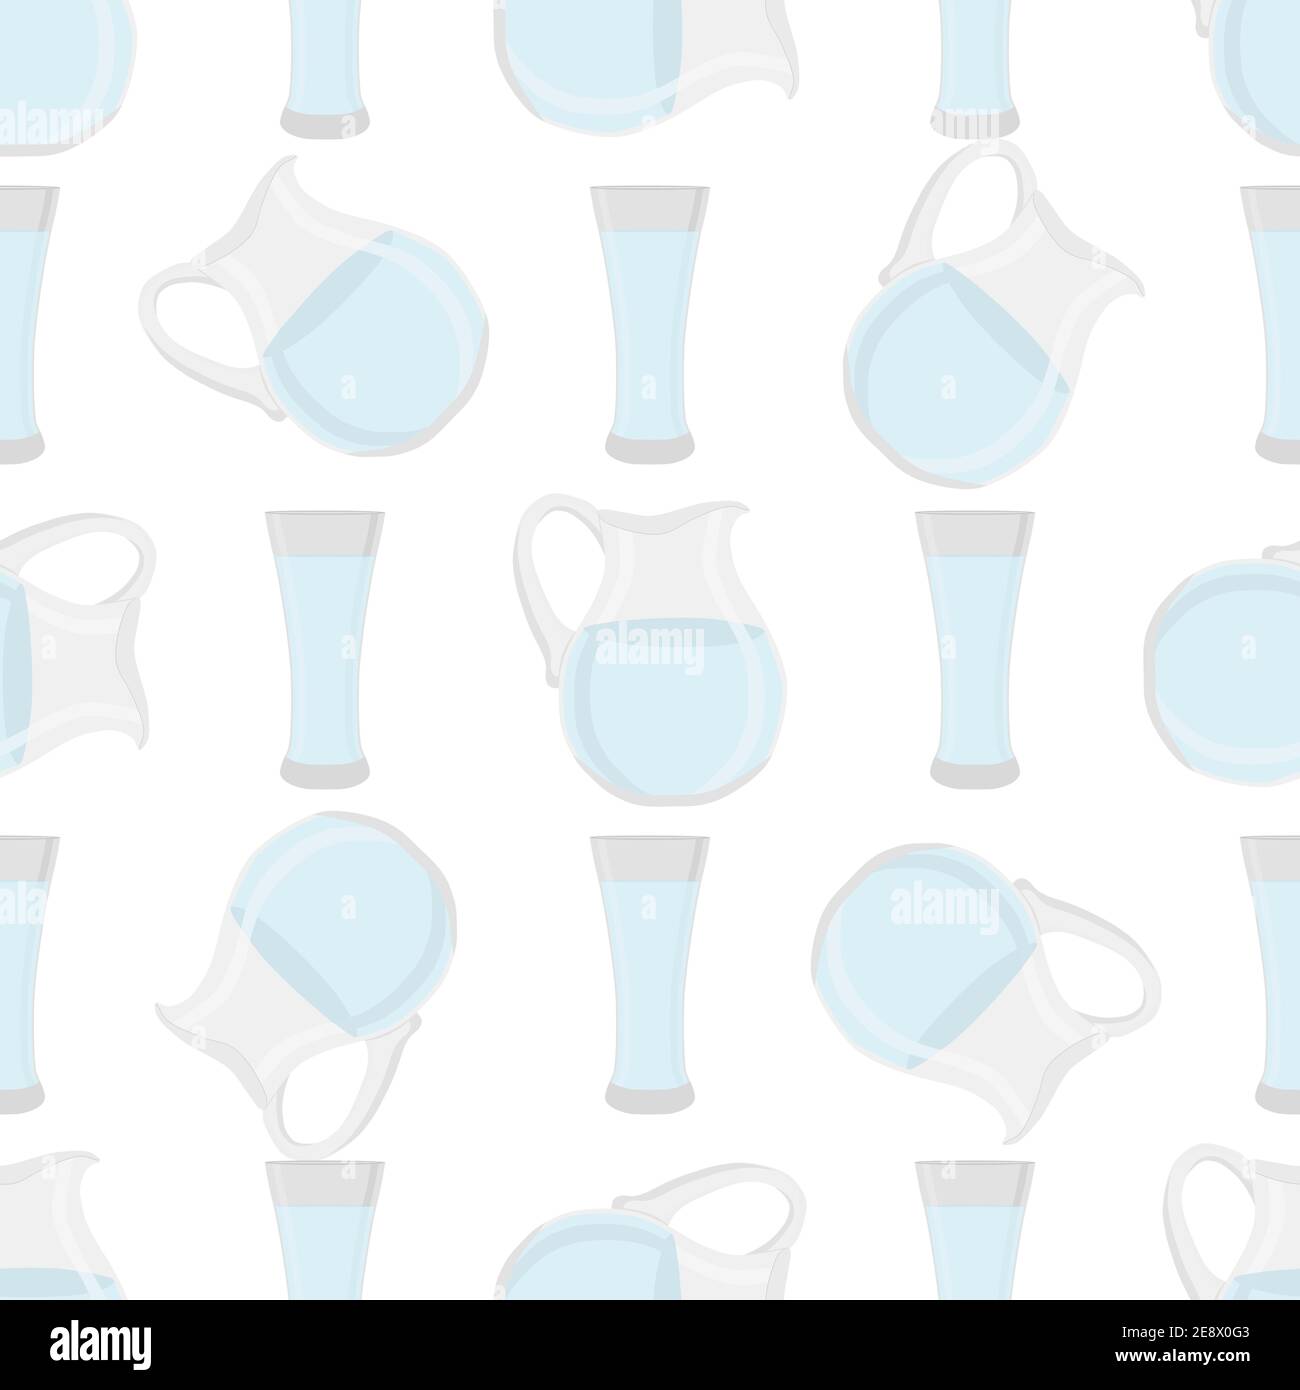 Fresh water in jar and glass on white background Vector Image